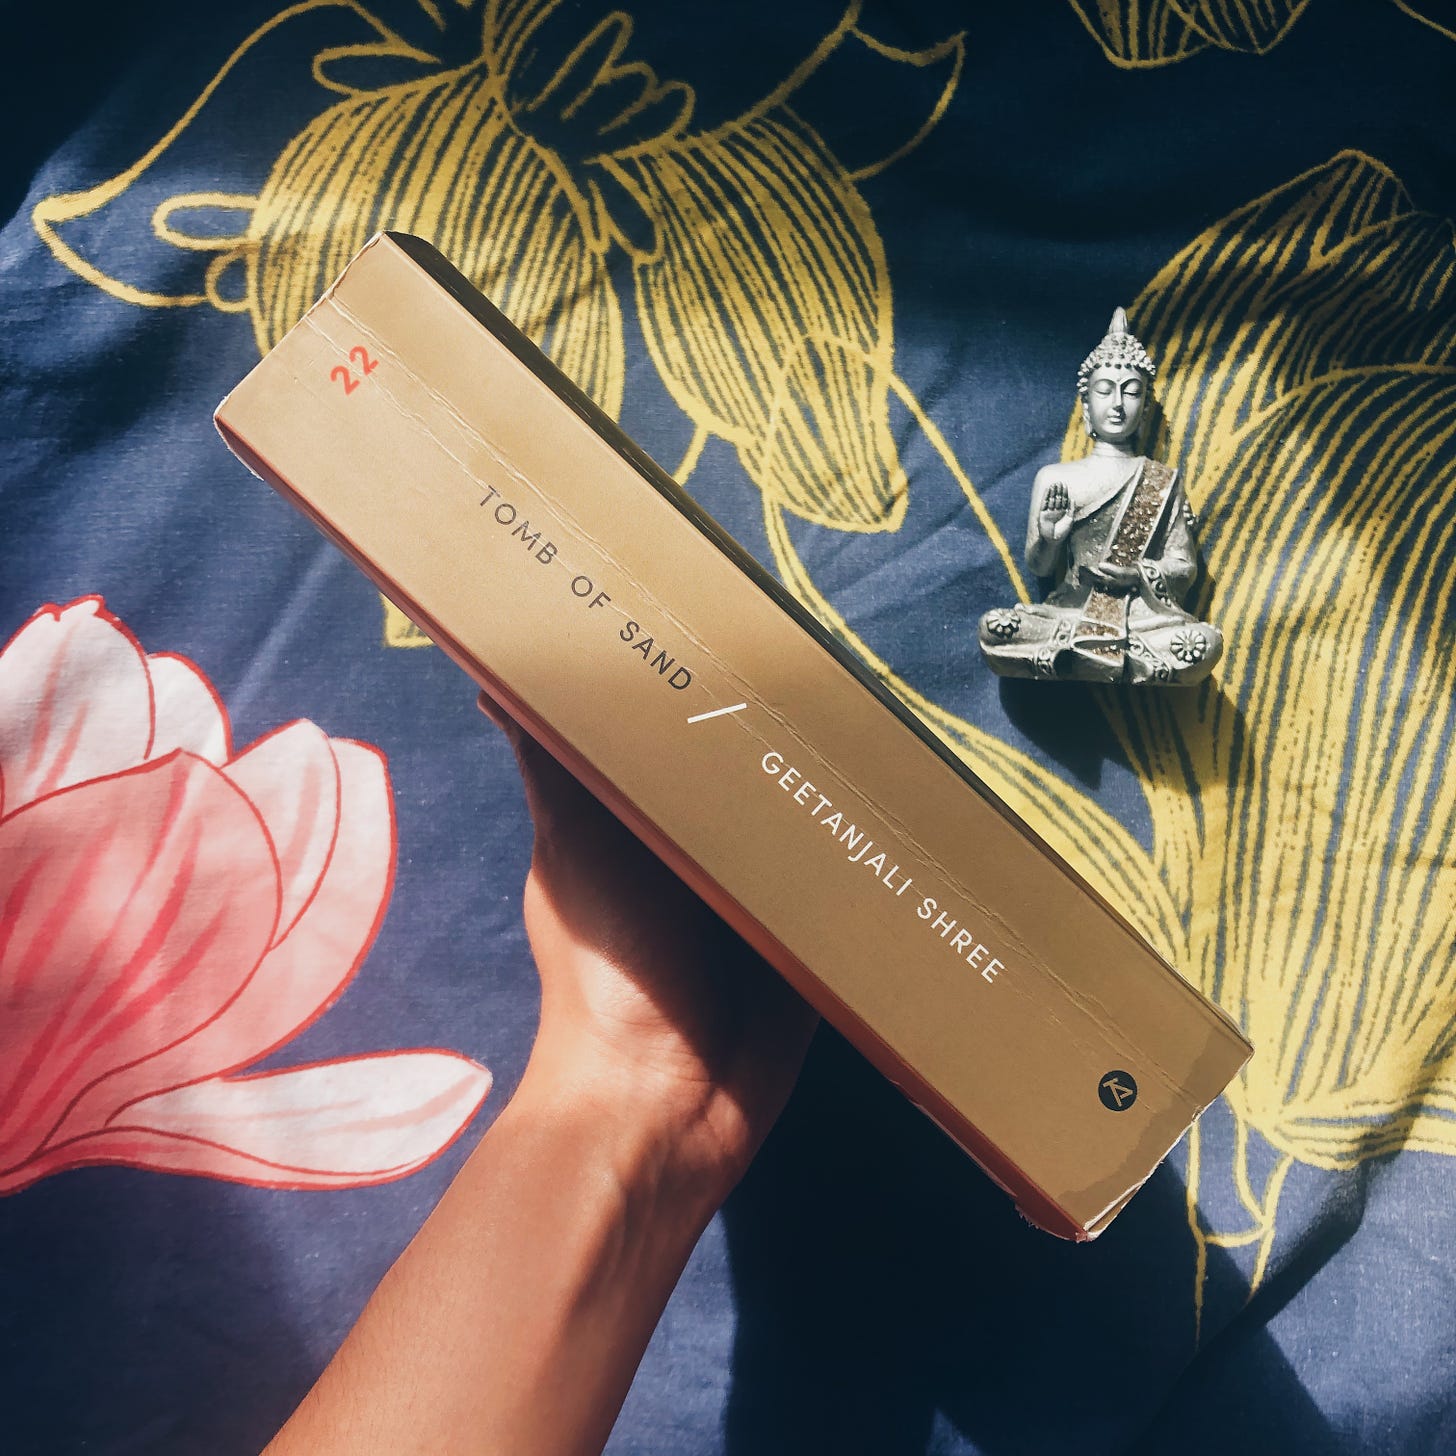 holding “Tomb of Sand” diagonally to show the spine of the book alongside a small Buddha statue. Navy blue and yellow background